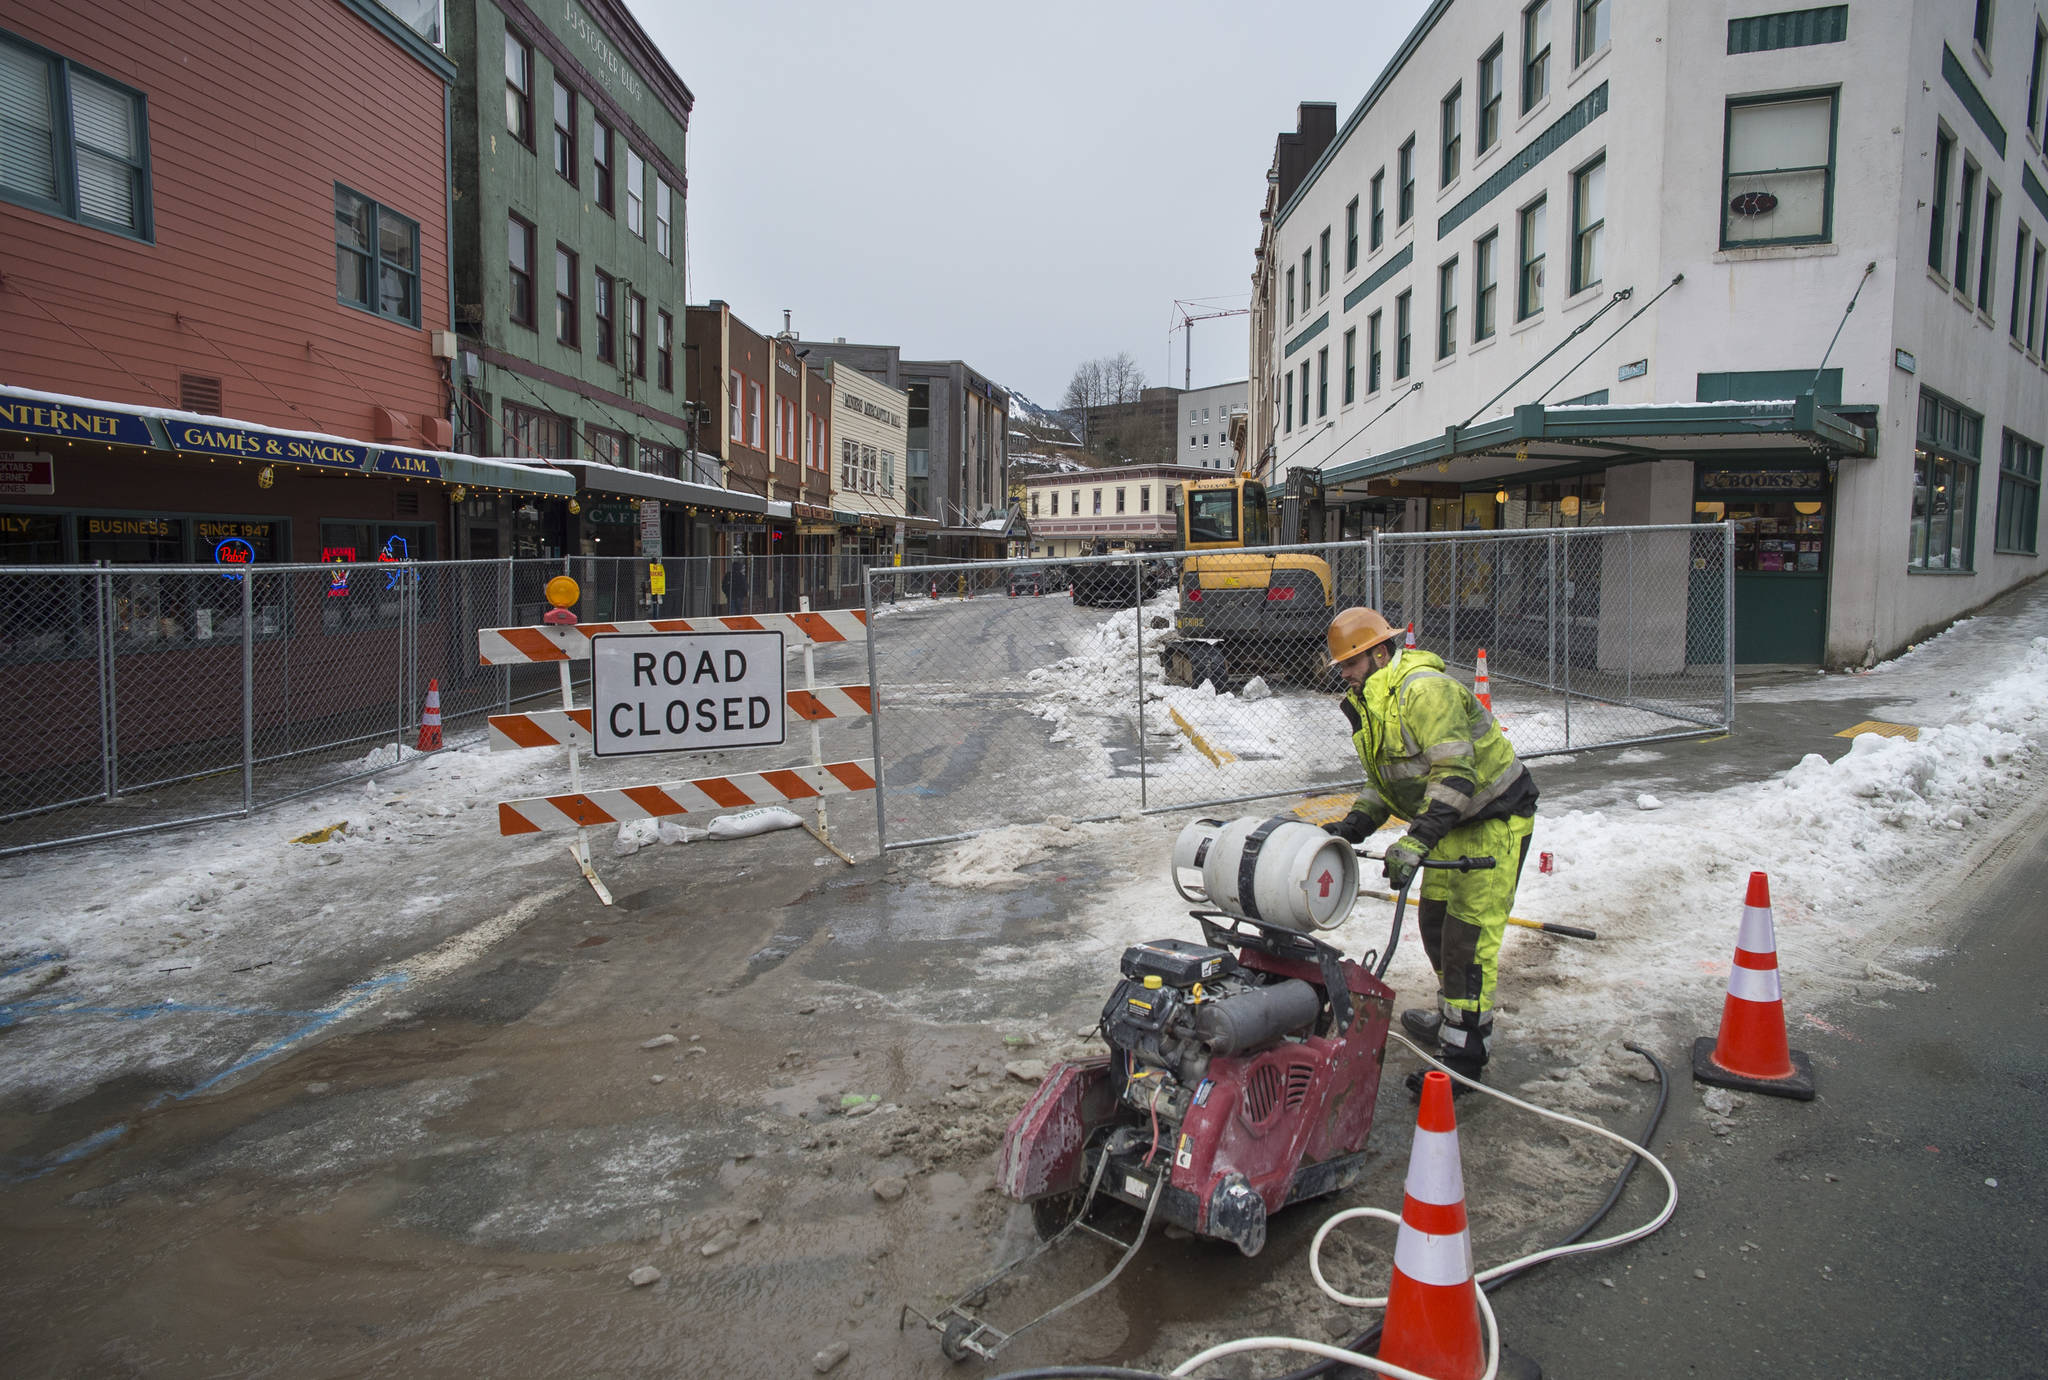 Mariyan Aleksiev, of Earthmovers, cuts into the pavement at the intersection of Franklin and Front Streets on Tuesday, Feb. 20, 2018. A section of Front Street will be closed as remodeling work to replace utilities, pavement, sidewalk and lighting fixtures take place over the next few months. (Michael Penn | Juneau Empire File)